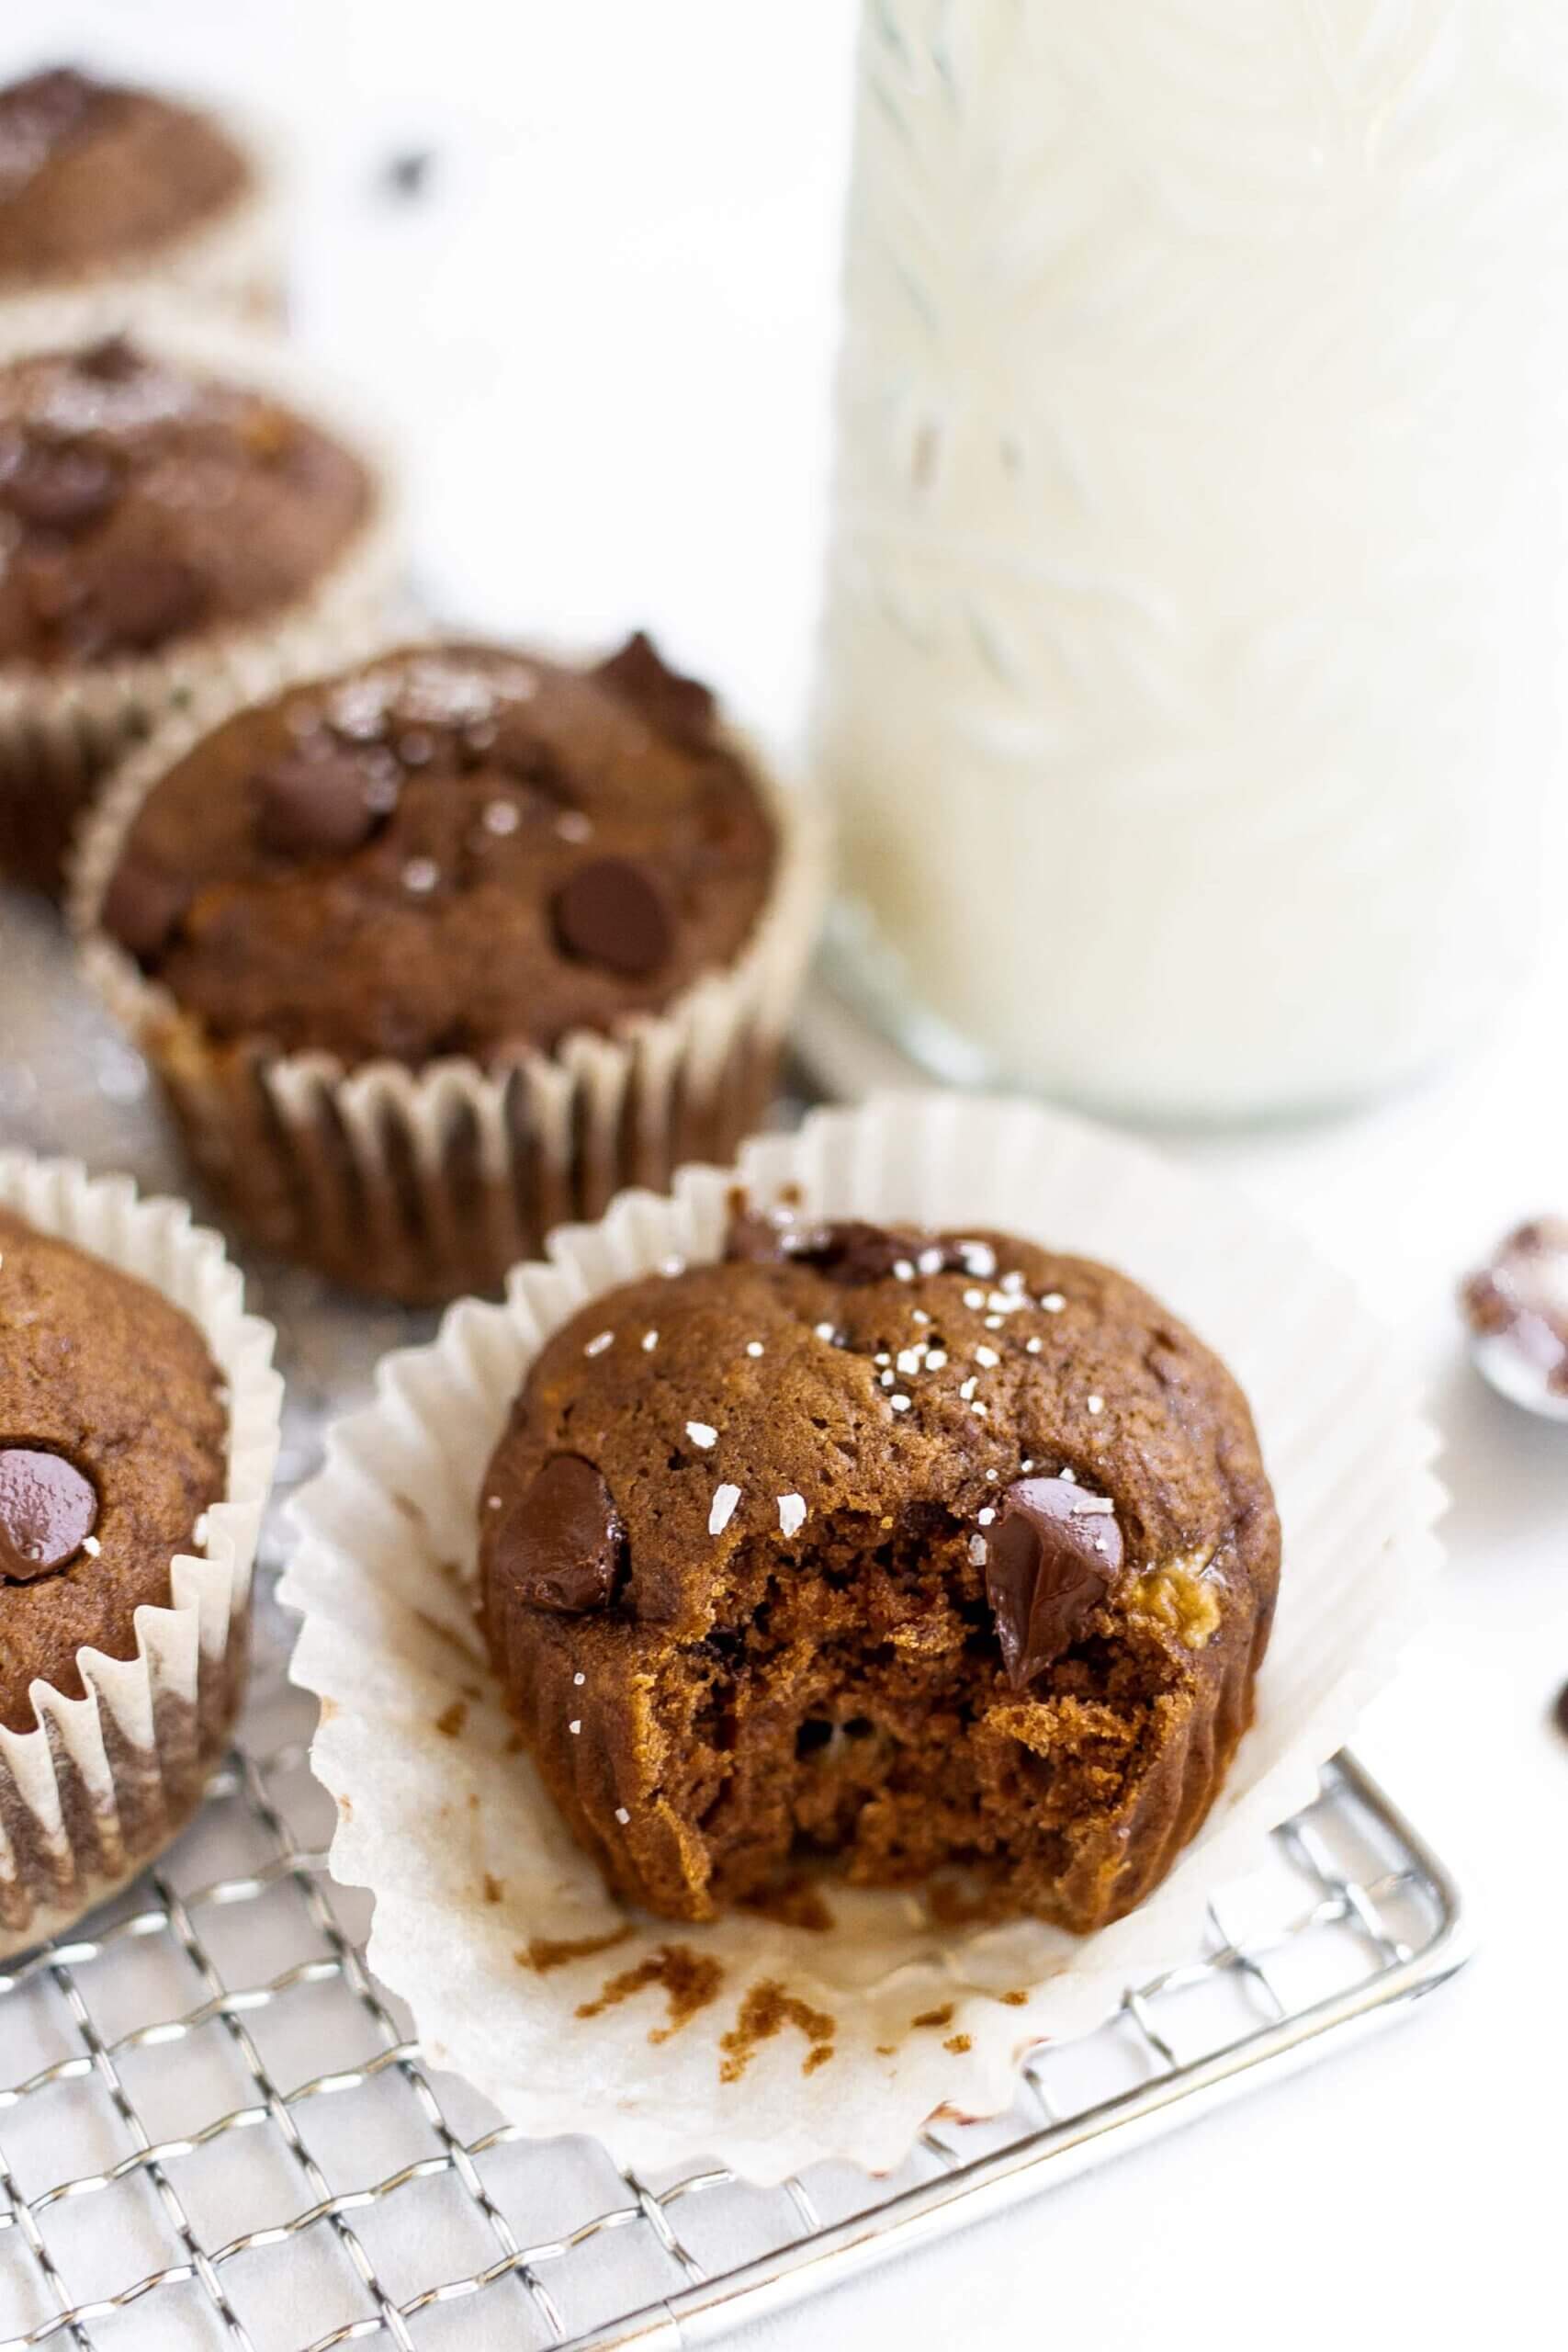 Easy double chocolate banana muffins on a tray with milk